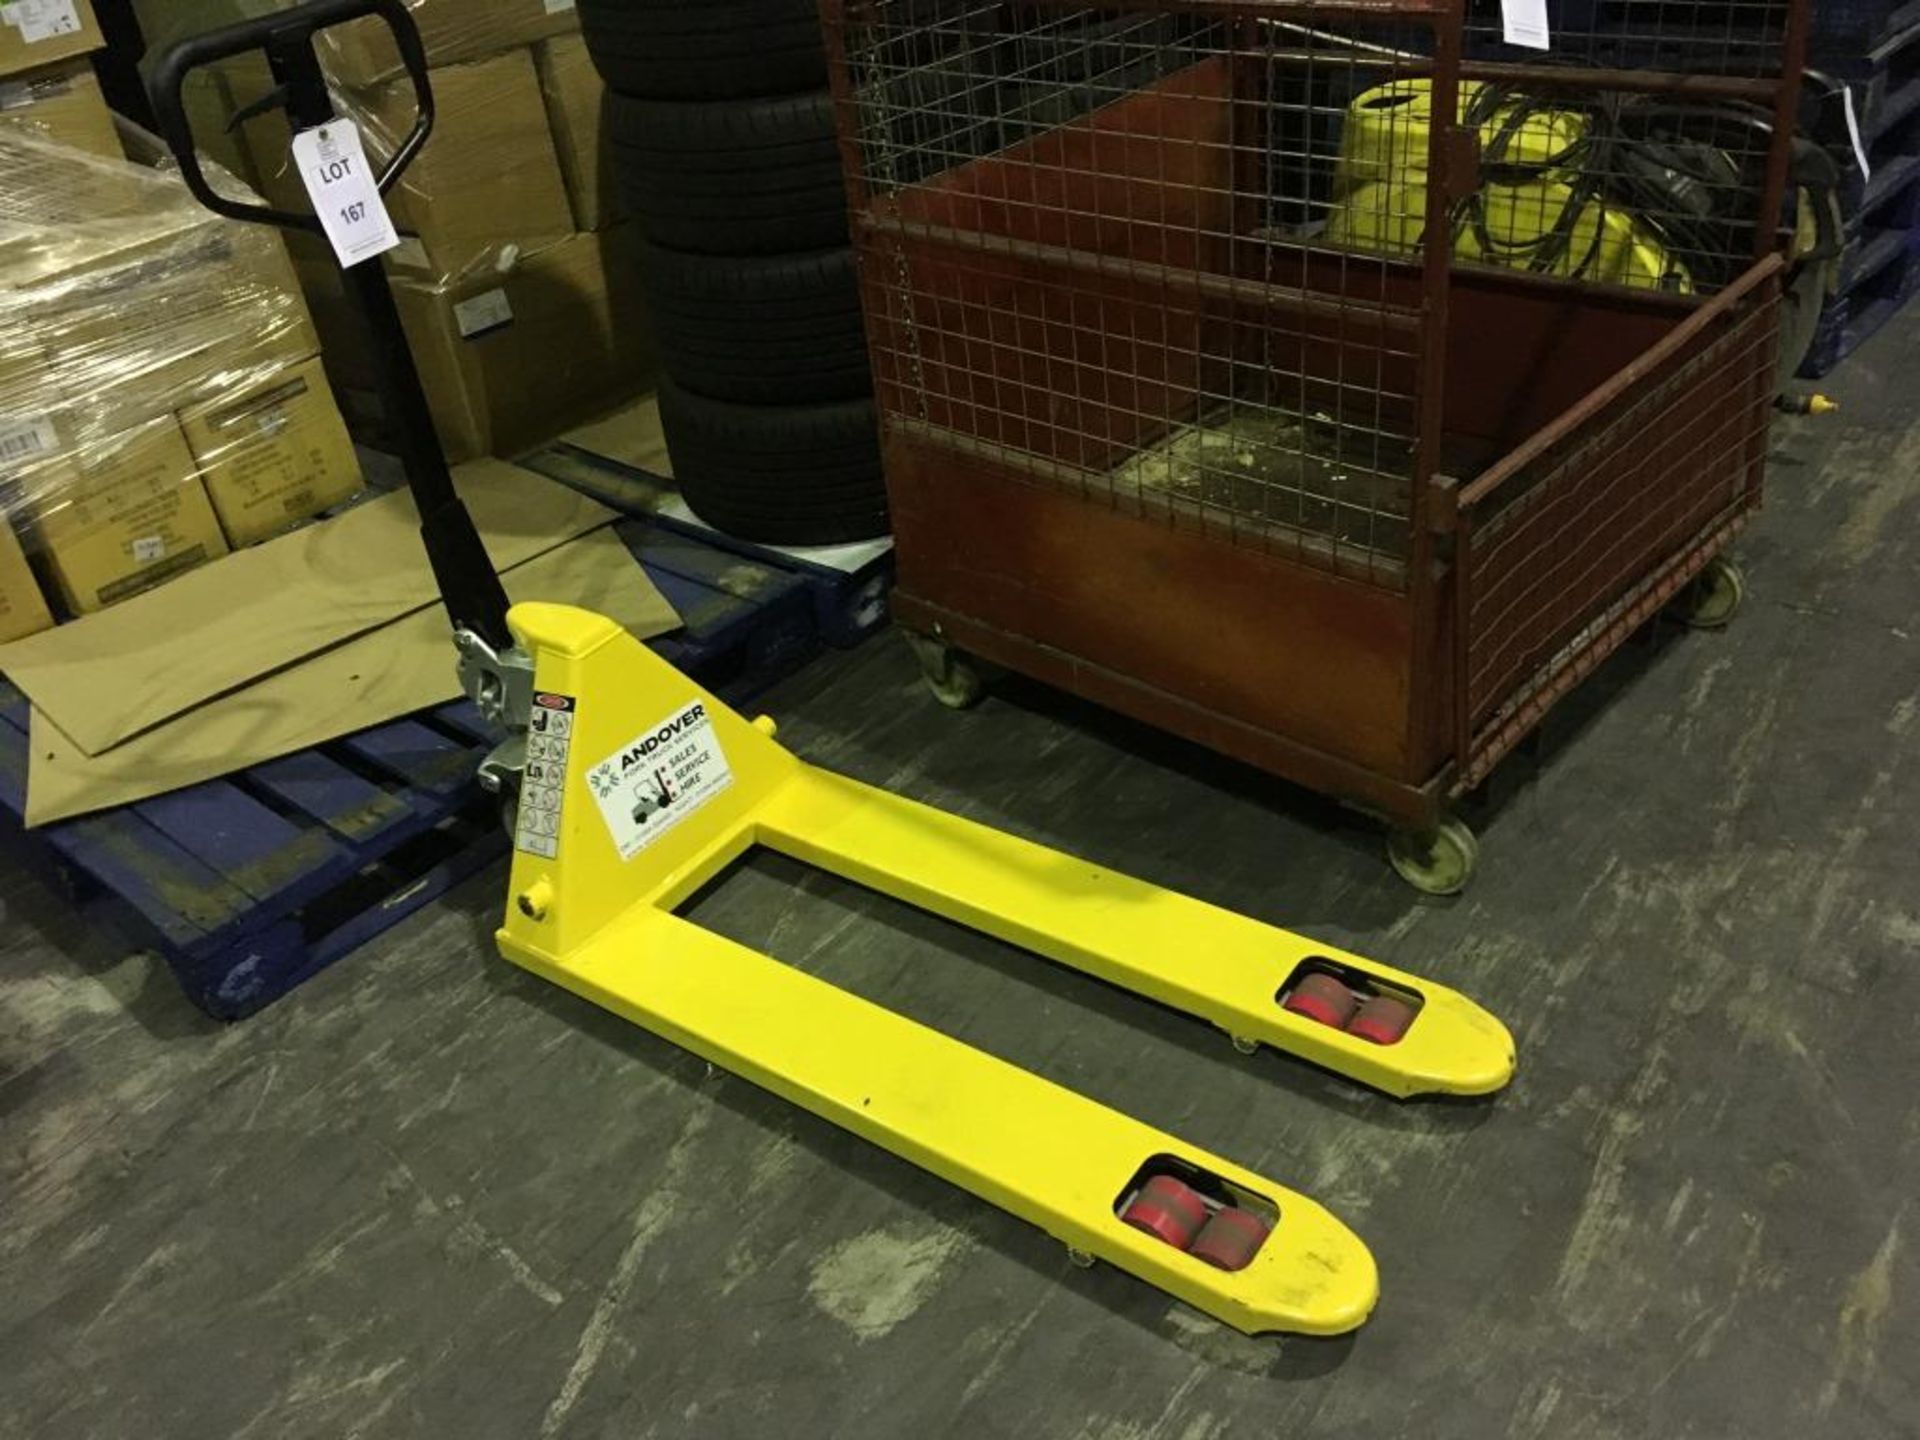 Total Lifter 2,500 kg pallet truck serial number 17042852M/512 (2017). Please note: This